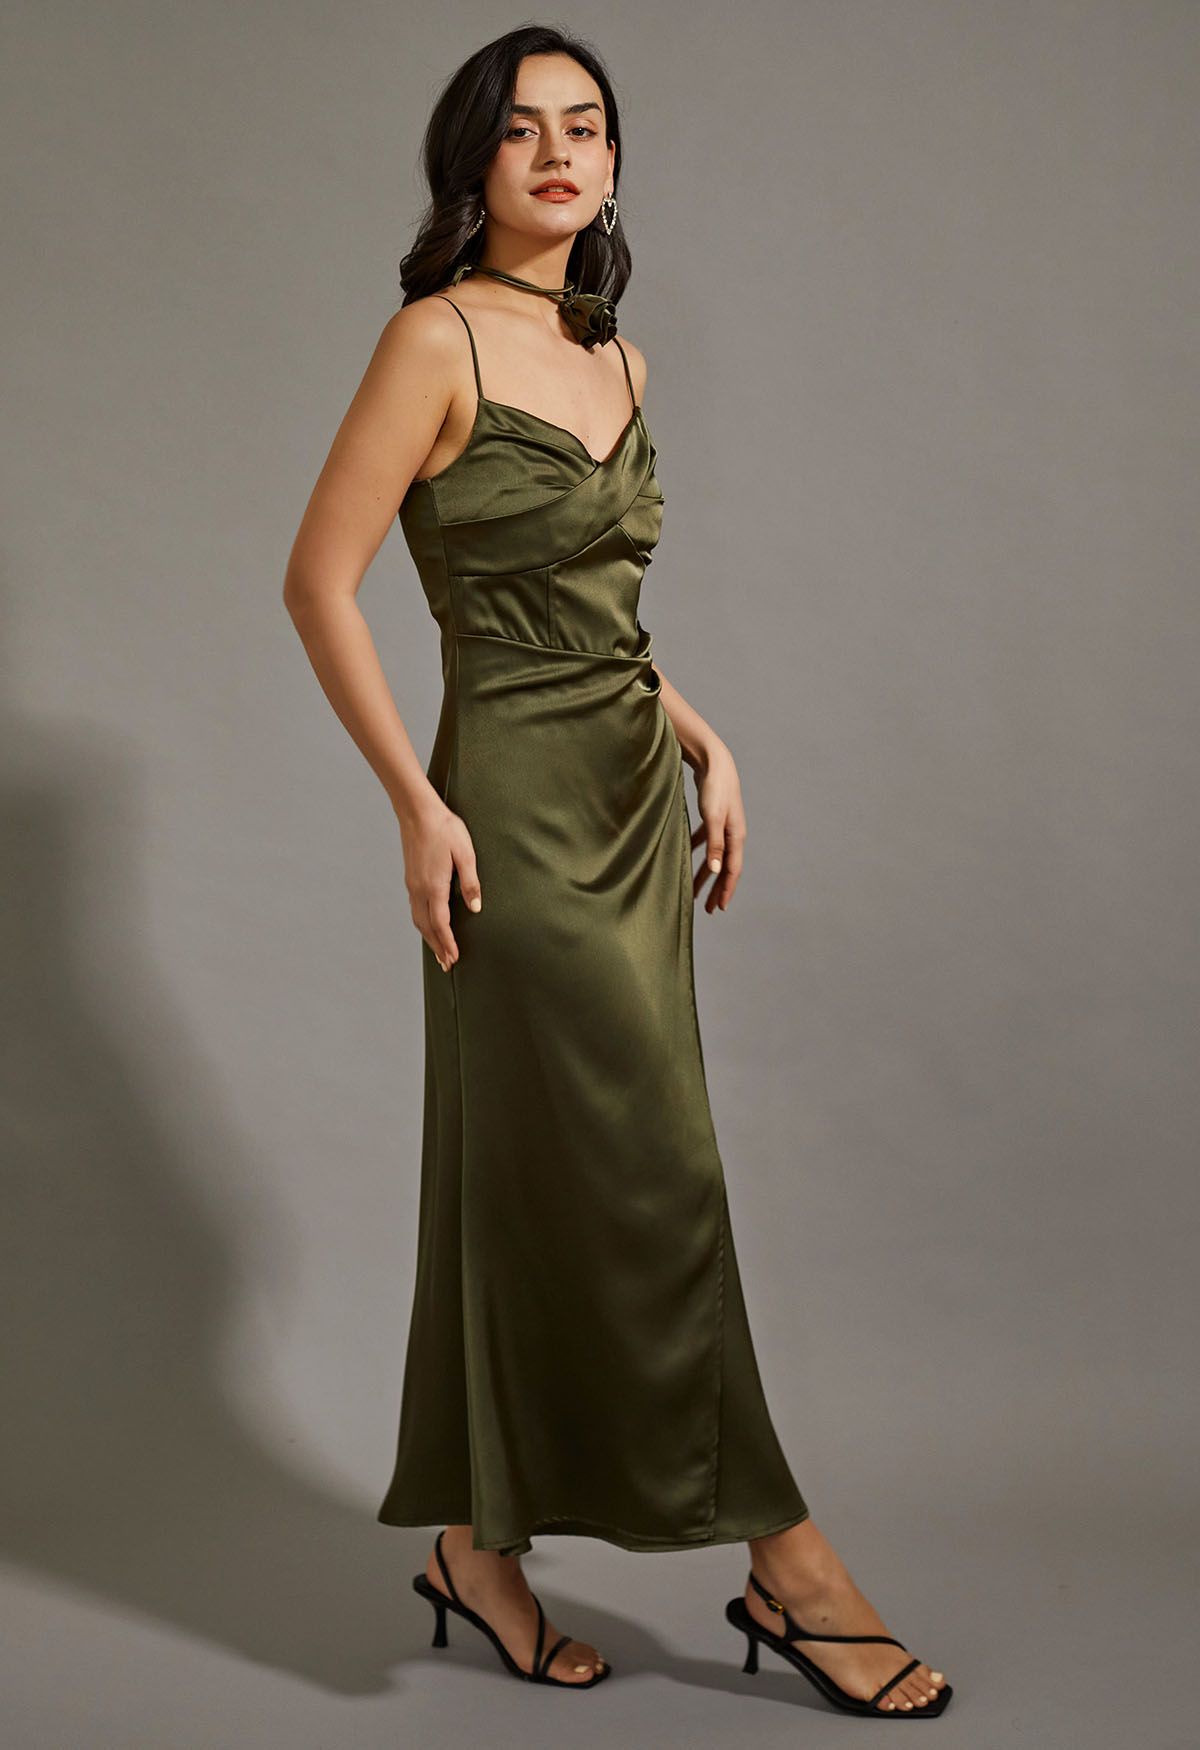 Floral Choker Satin Cami Maxi Dress in Olive - Retro, Indie and Unique  Fashion